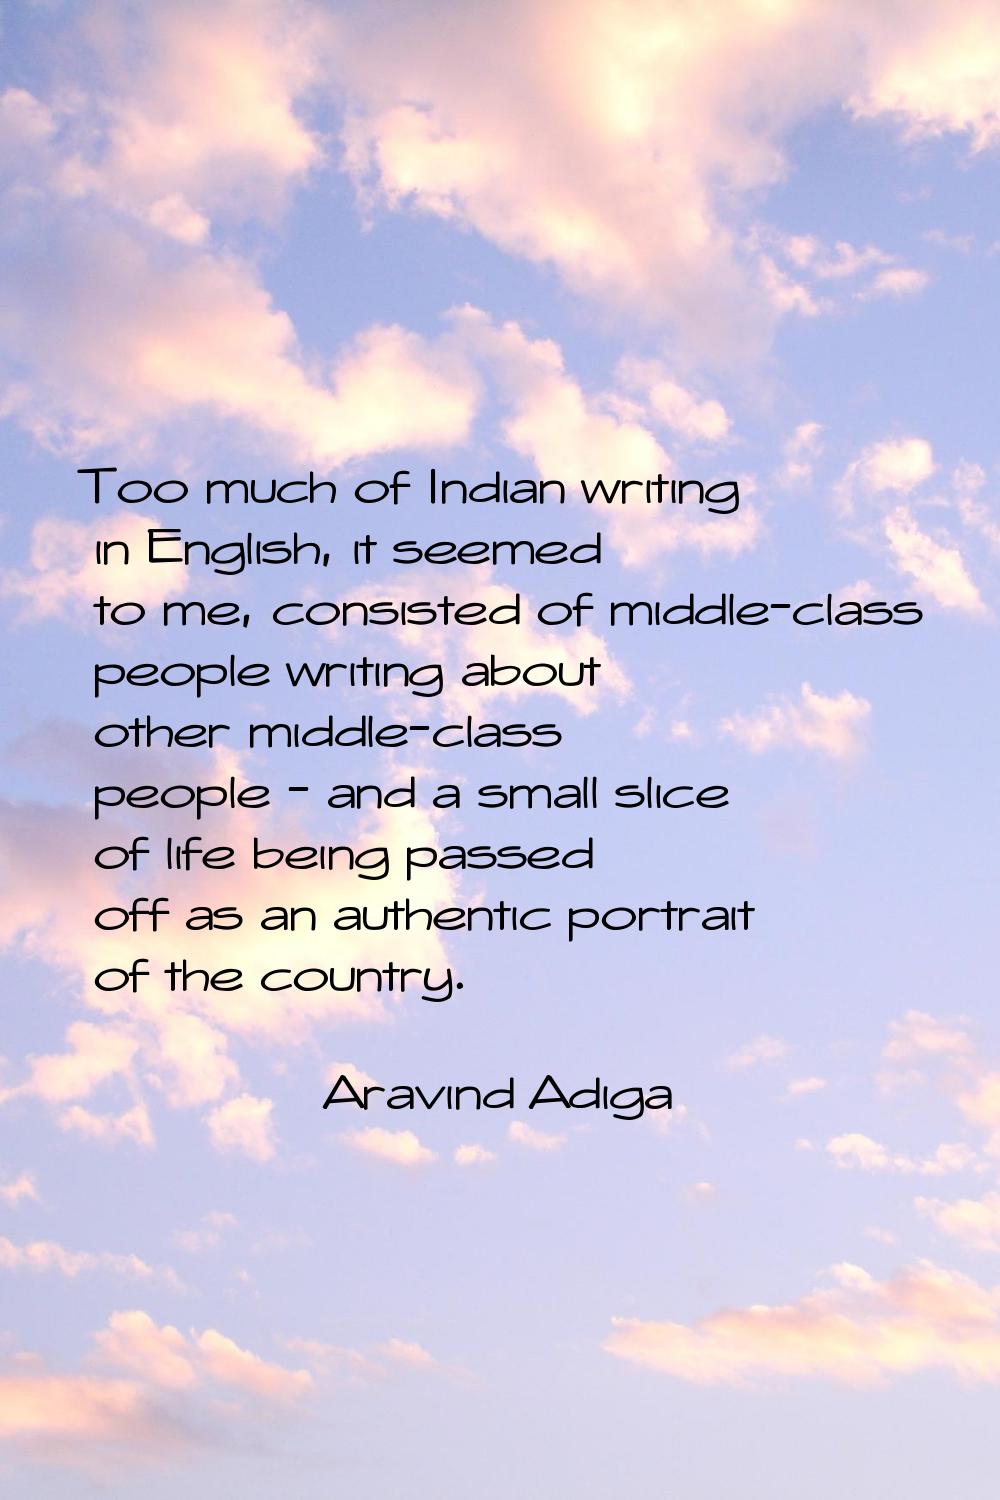 Too much of Indian writing in English, it seemed to me, consisted of middle-class people writing ab